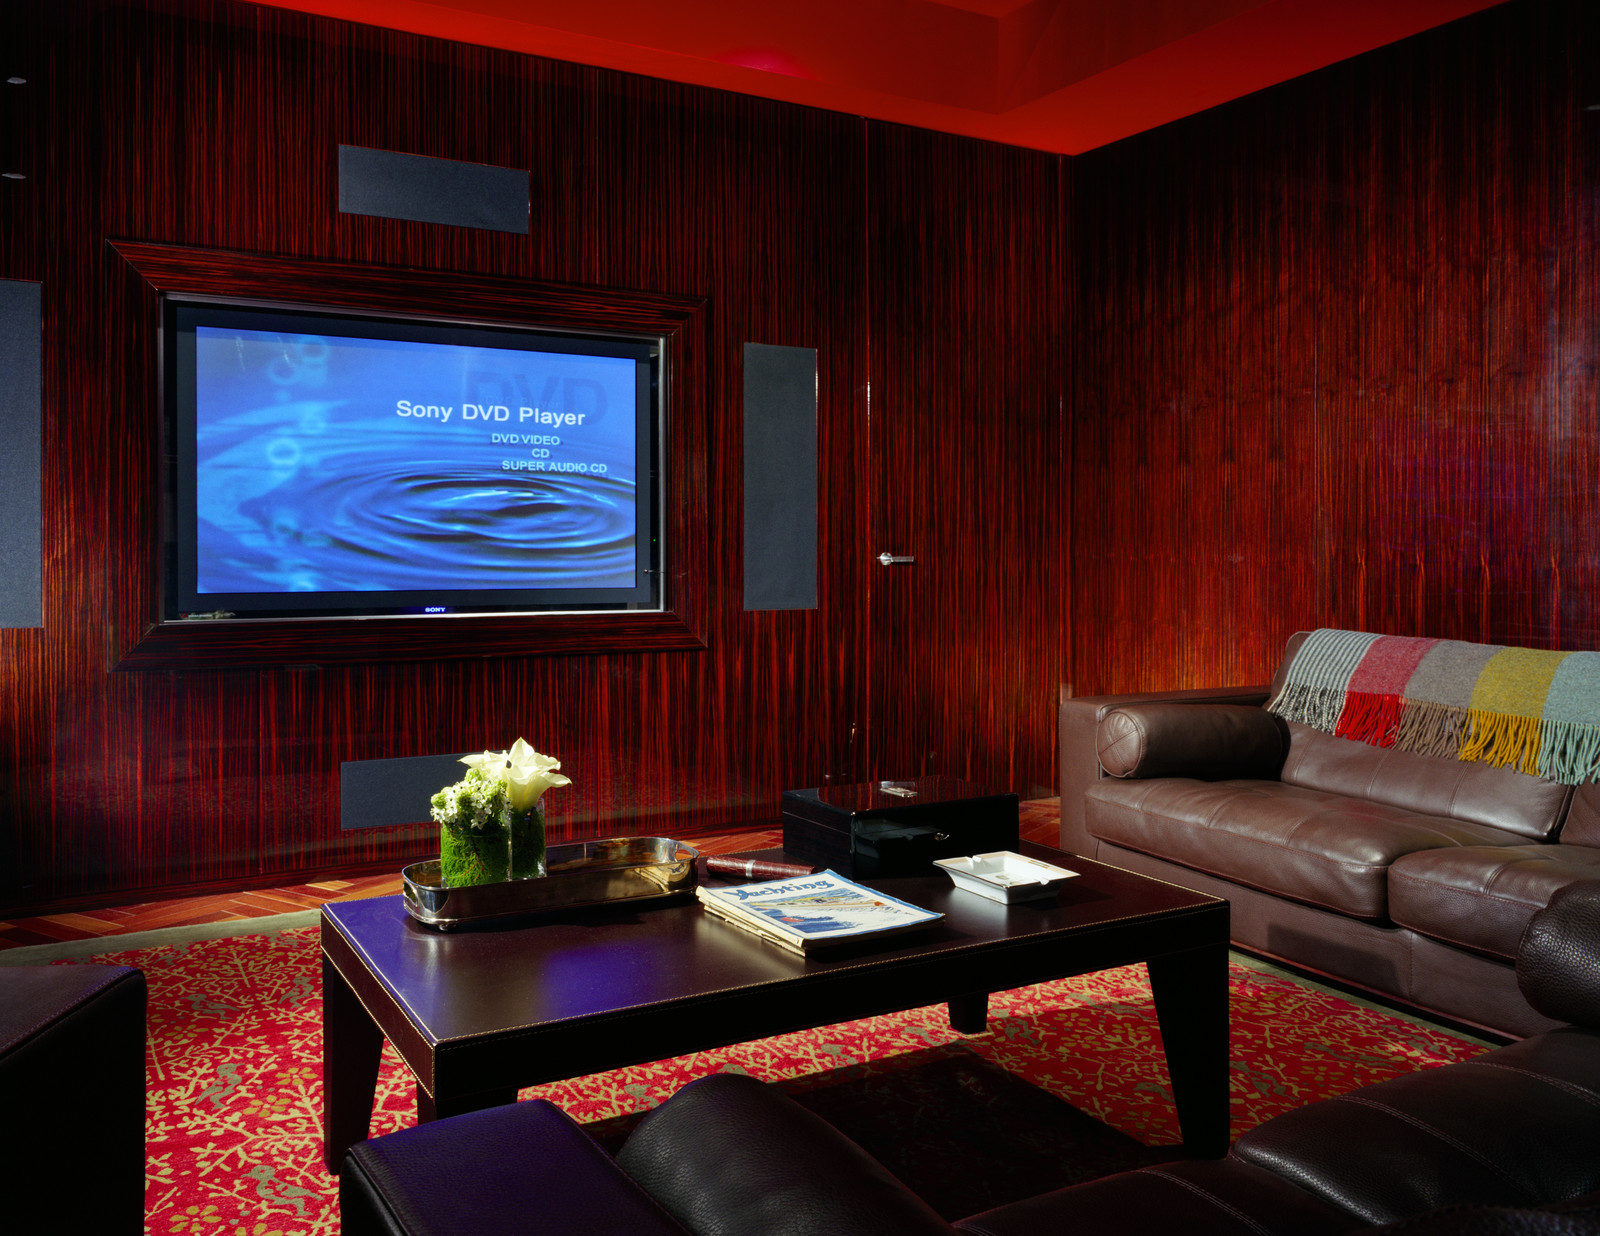 These custom wall panels make for an timeless, elegant and cozy media room